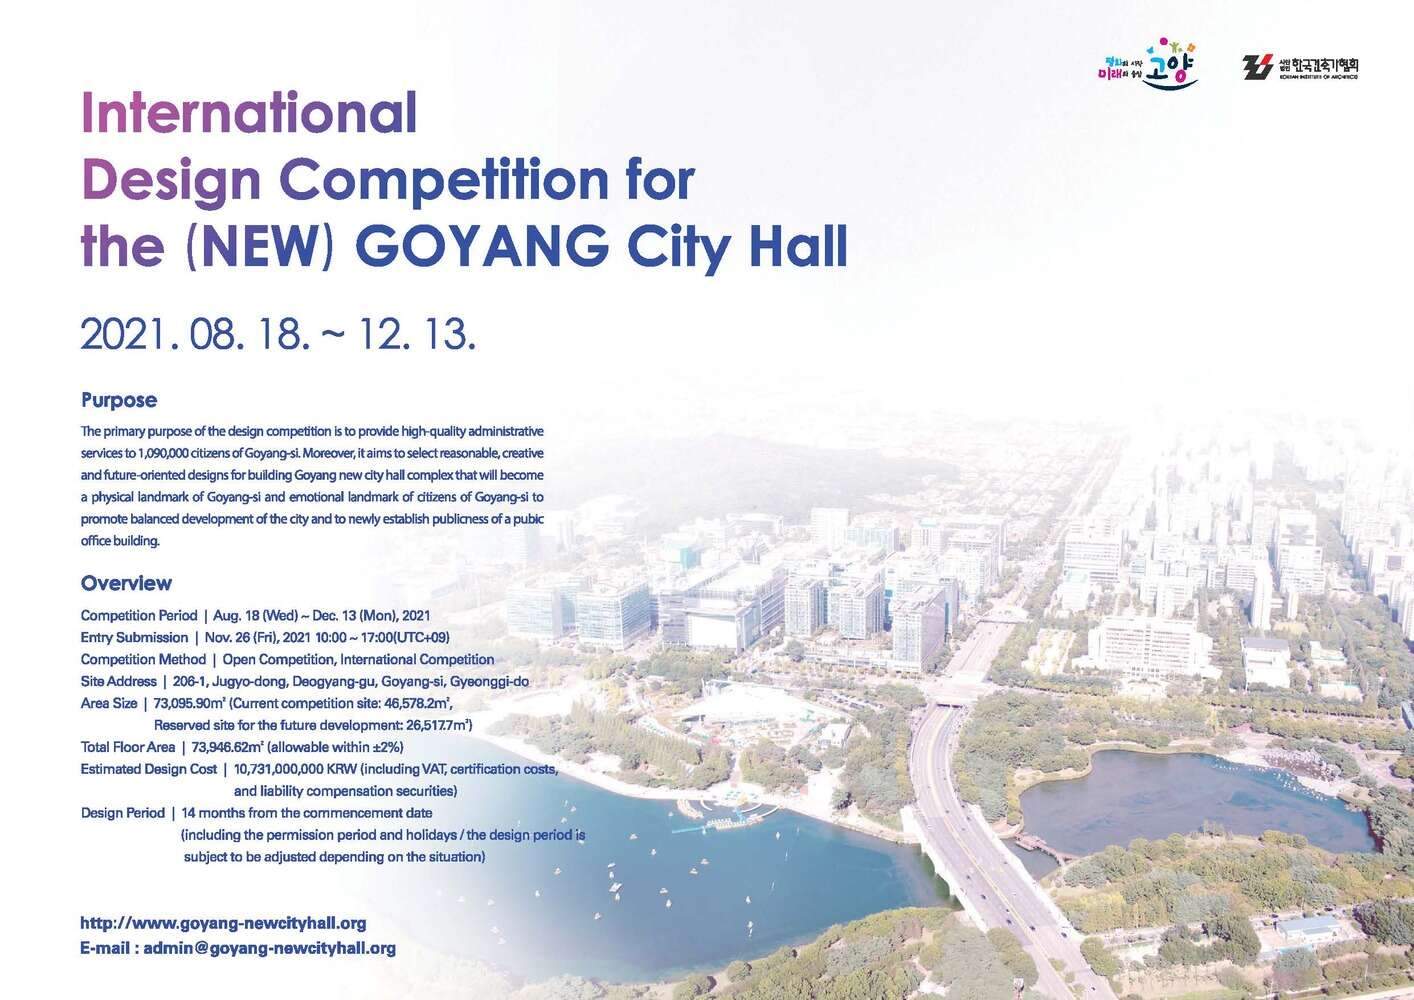 International Design Competition for the (New) GOYANG CITY Hall